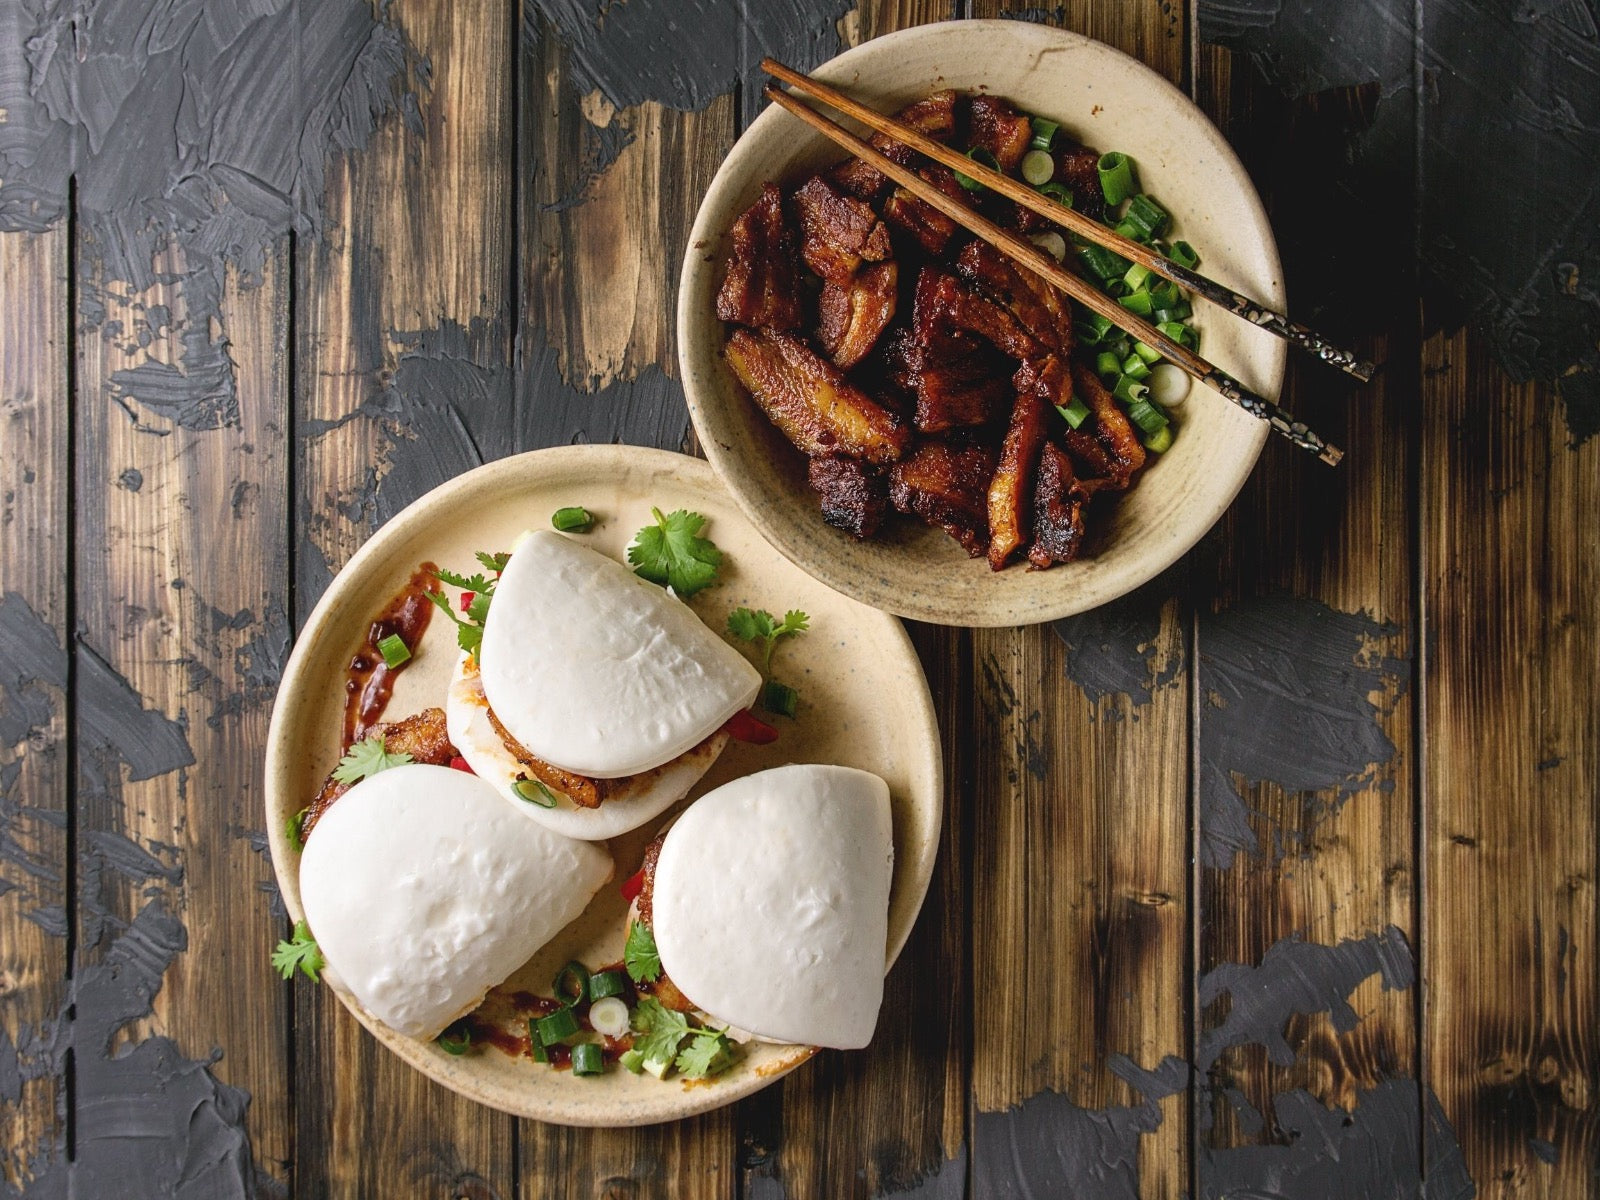 Taiwanese Gua Bao Buns With Spiced Heritage Pork Belly - Beck & Bulow